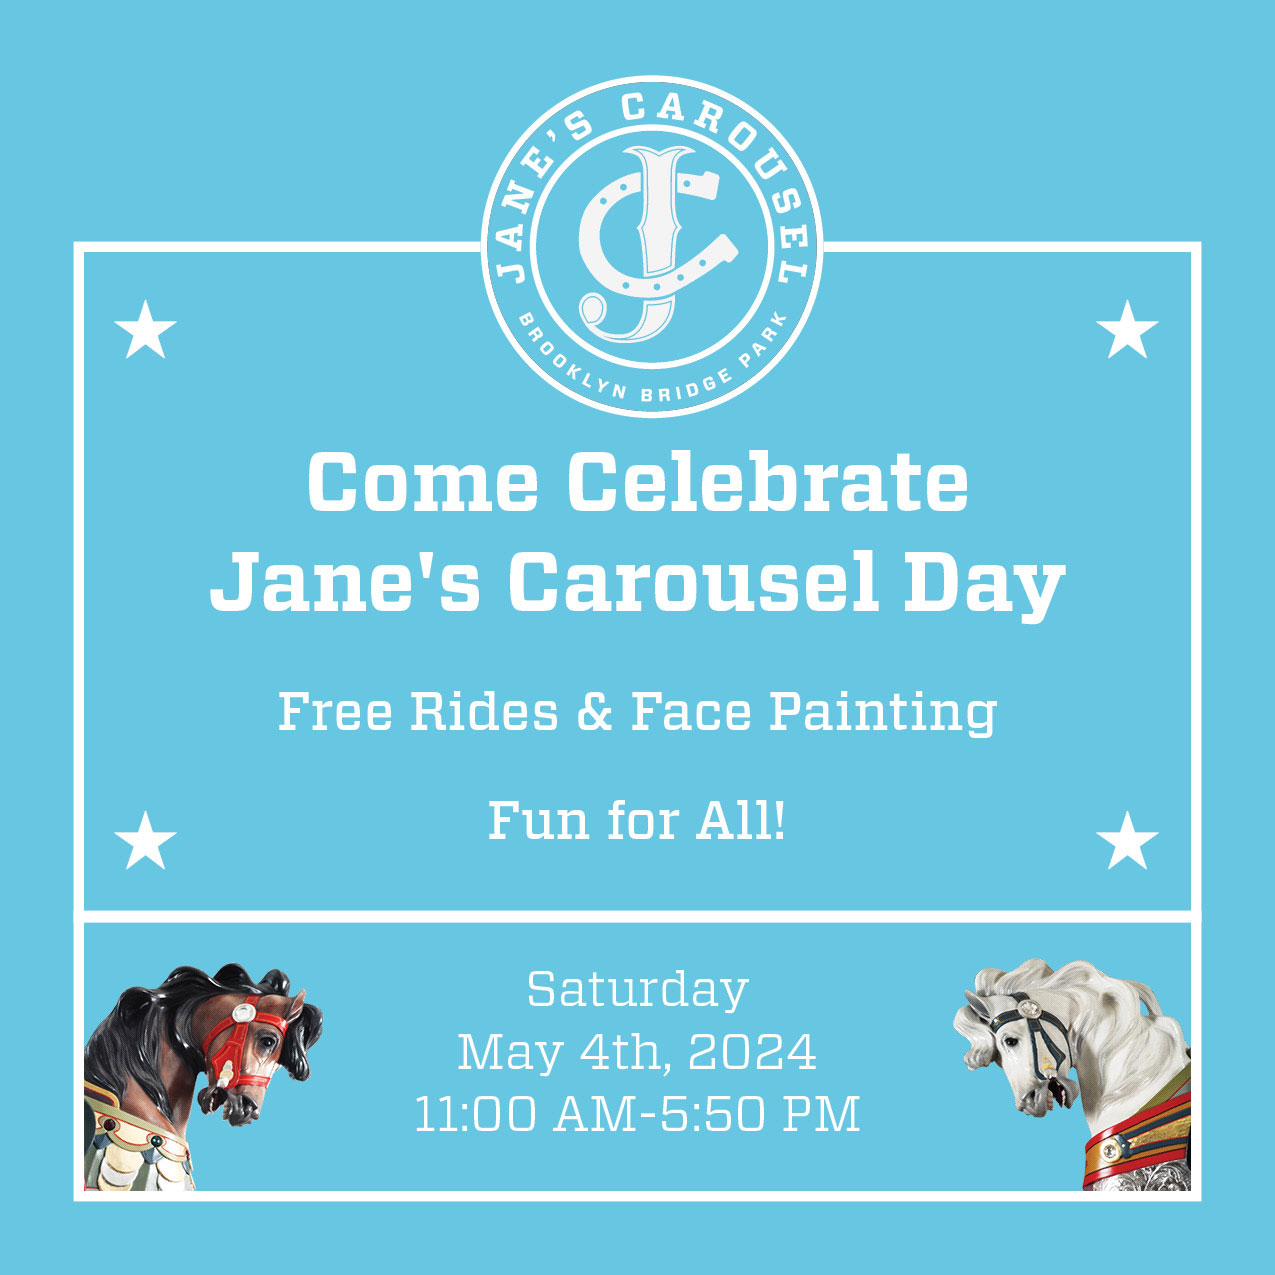 Come Celebrate Jane's Carousel Day! Free Rides & Face Painting—Fun for All! Saturday, May 4th, 11:00am—5:50pm.